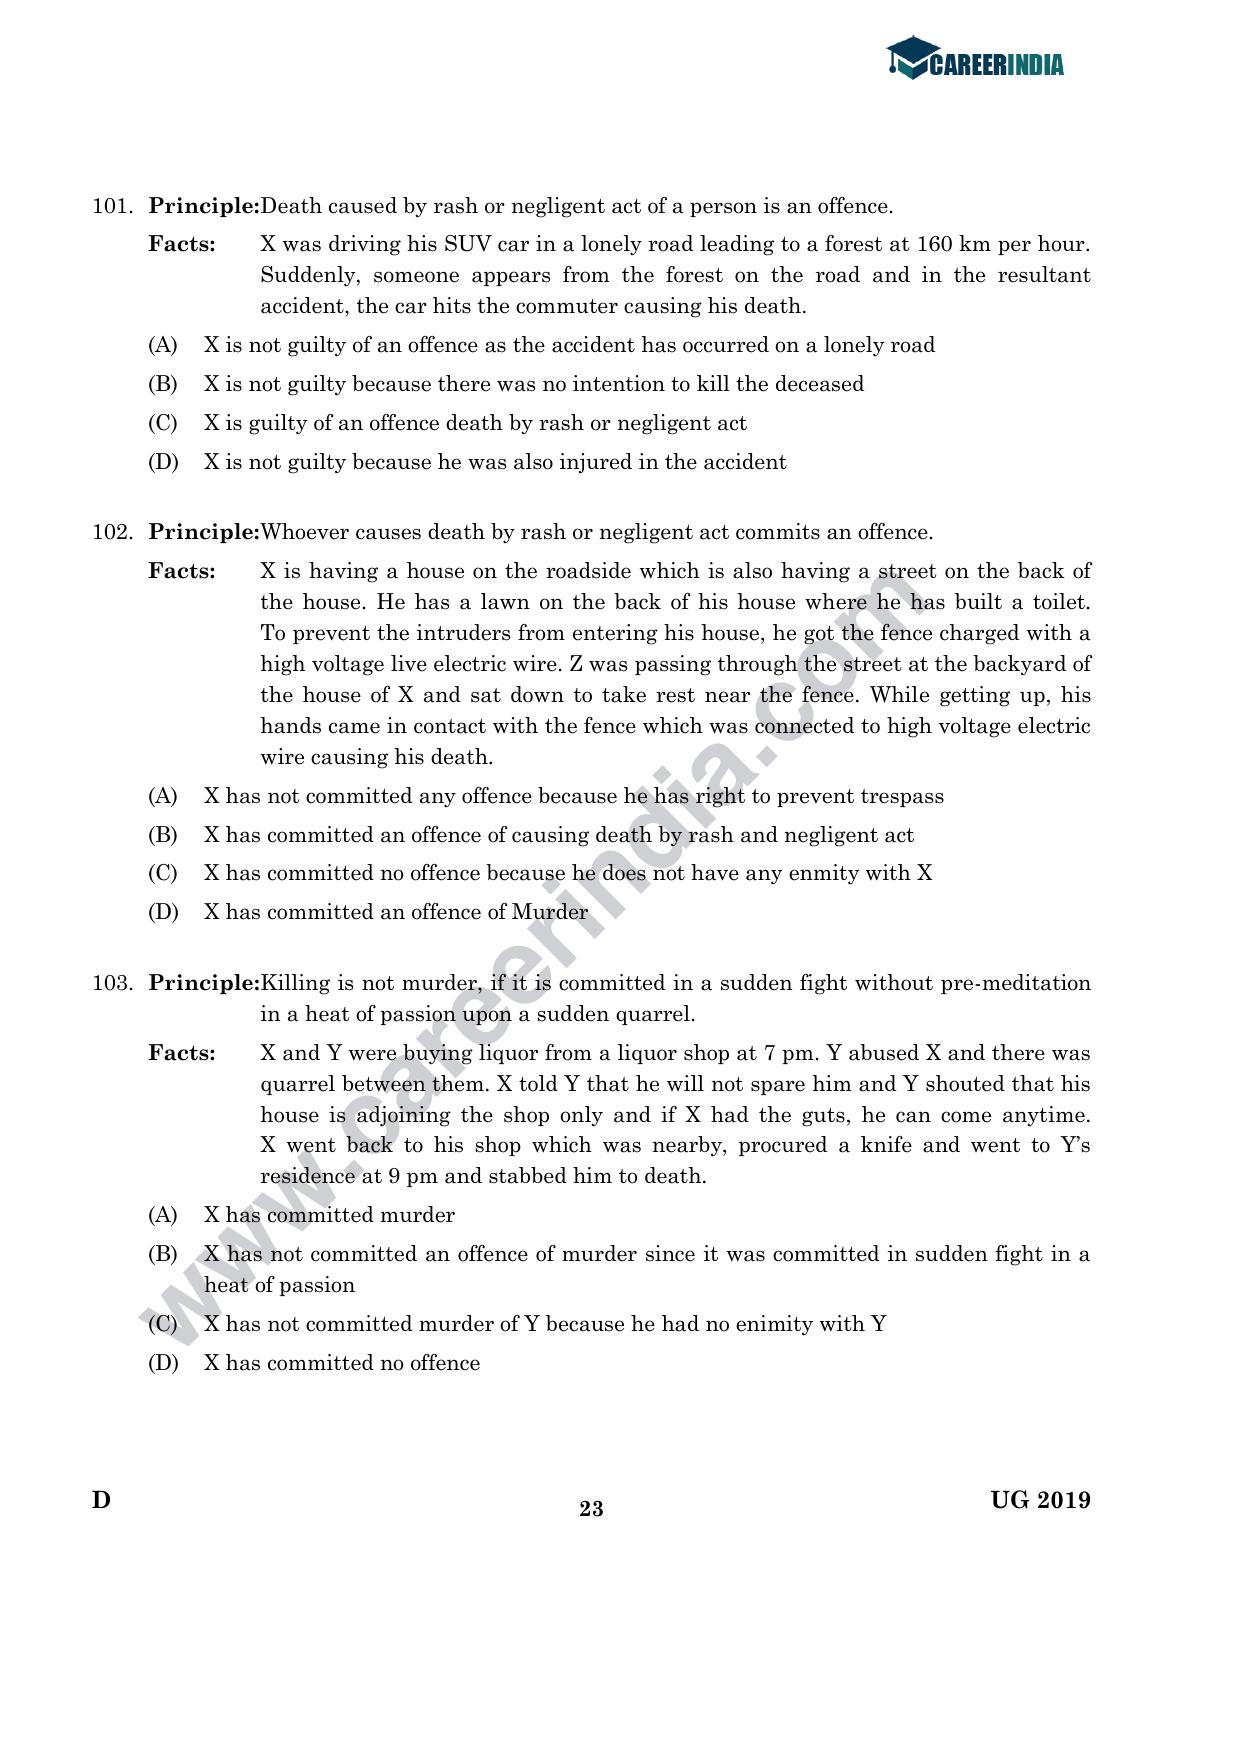 CLAT 2019 UG Logical-Reasoning Question Paper - Page 22